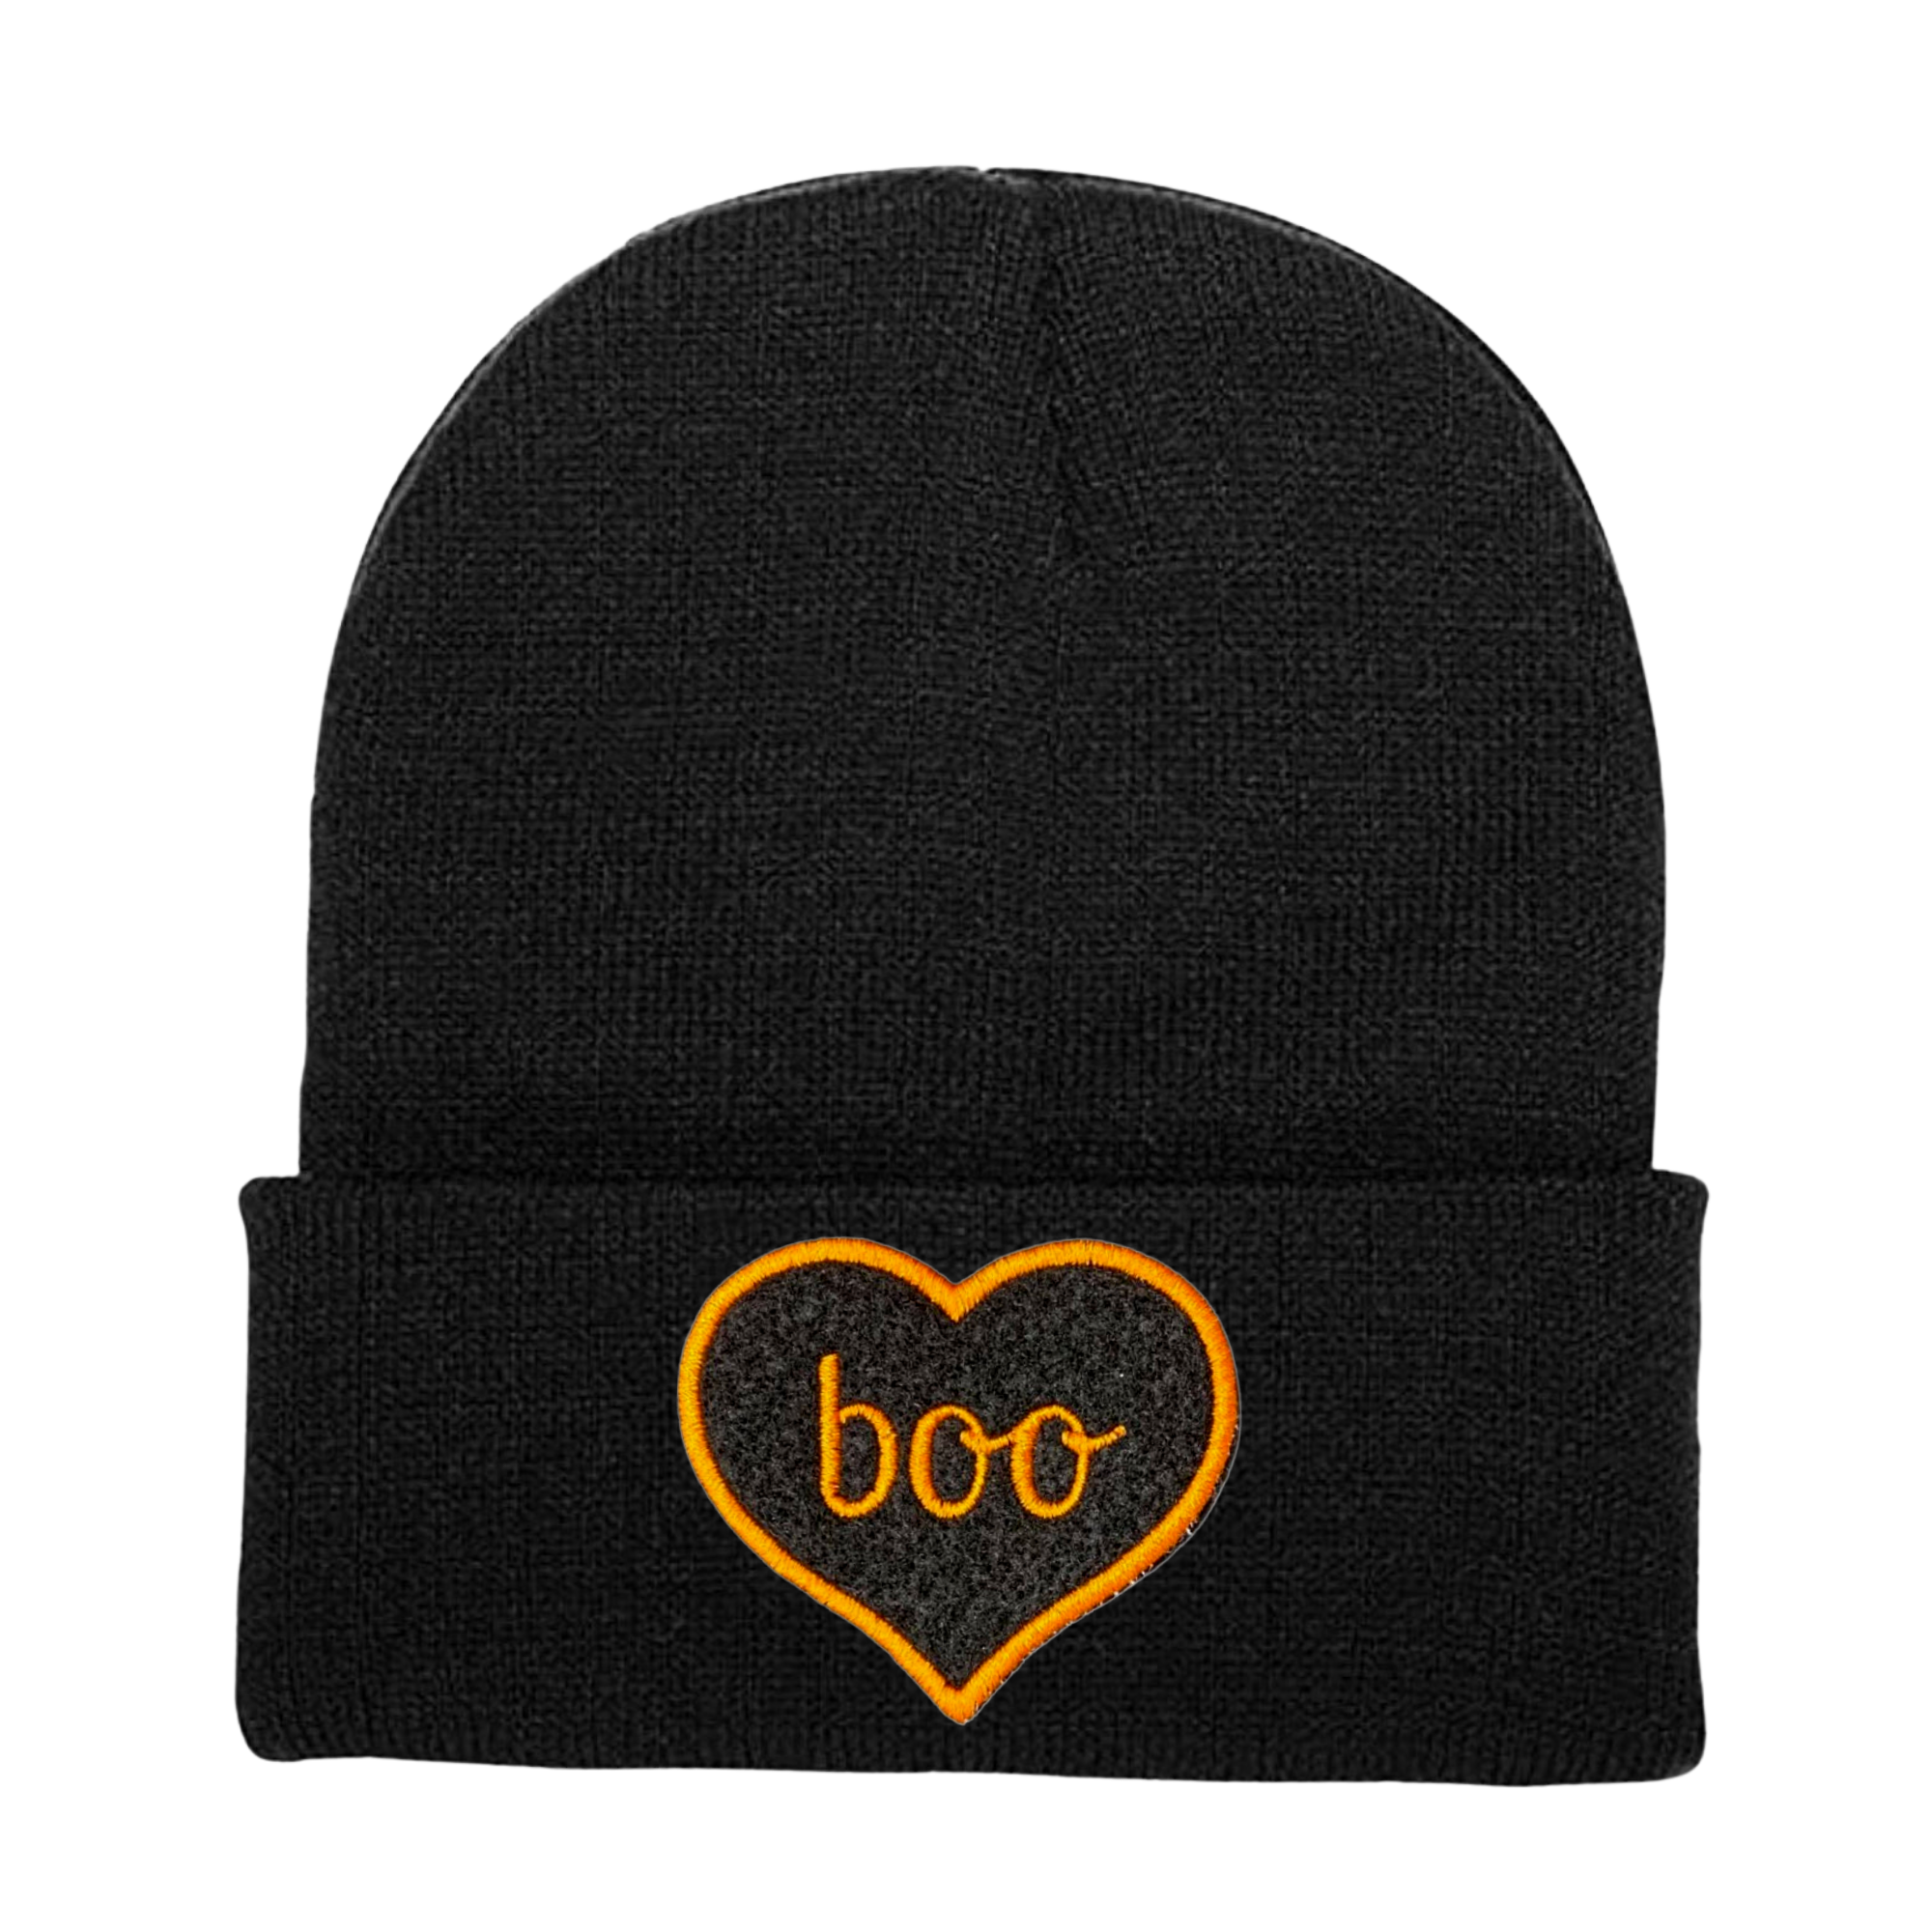 BOO Halloween Embroidered Patch Beanie Hat, One Size Fits All